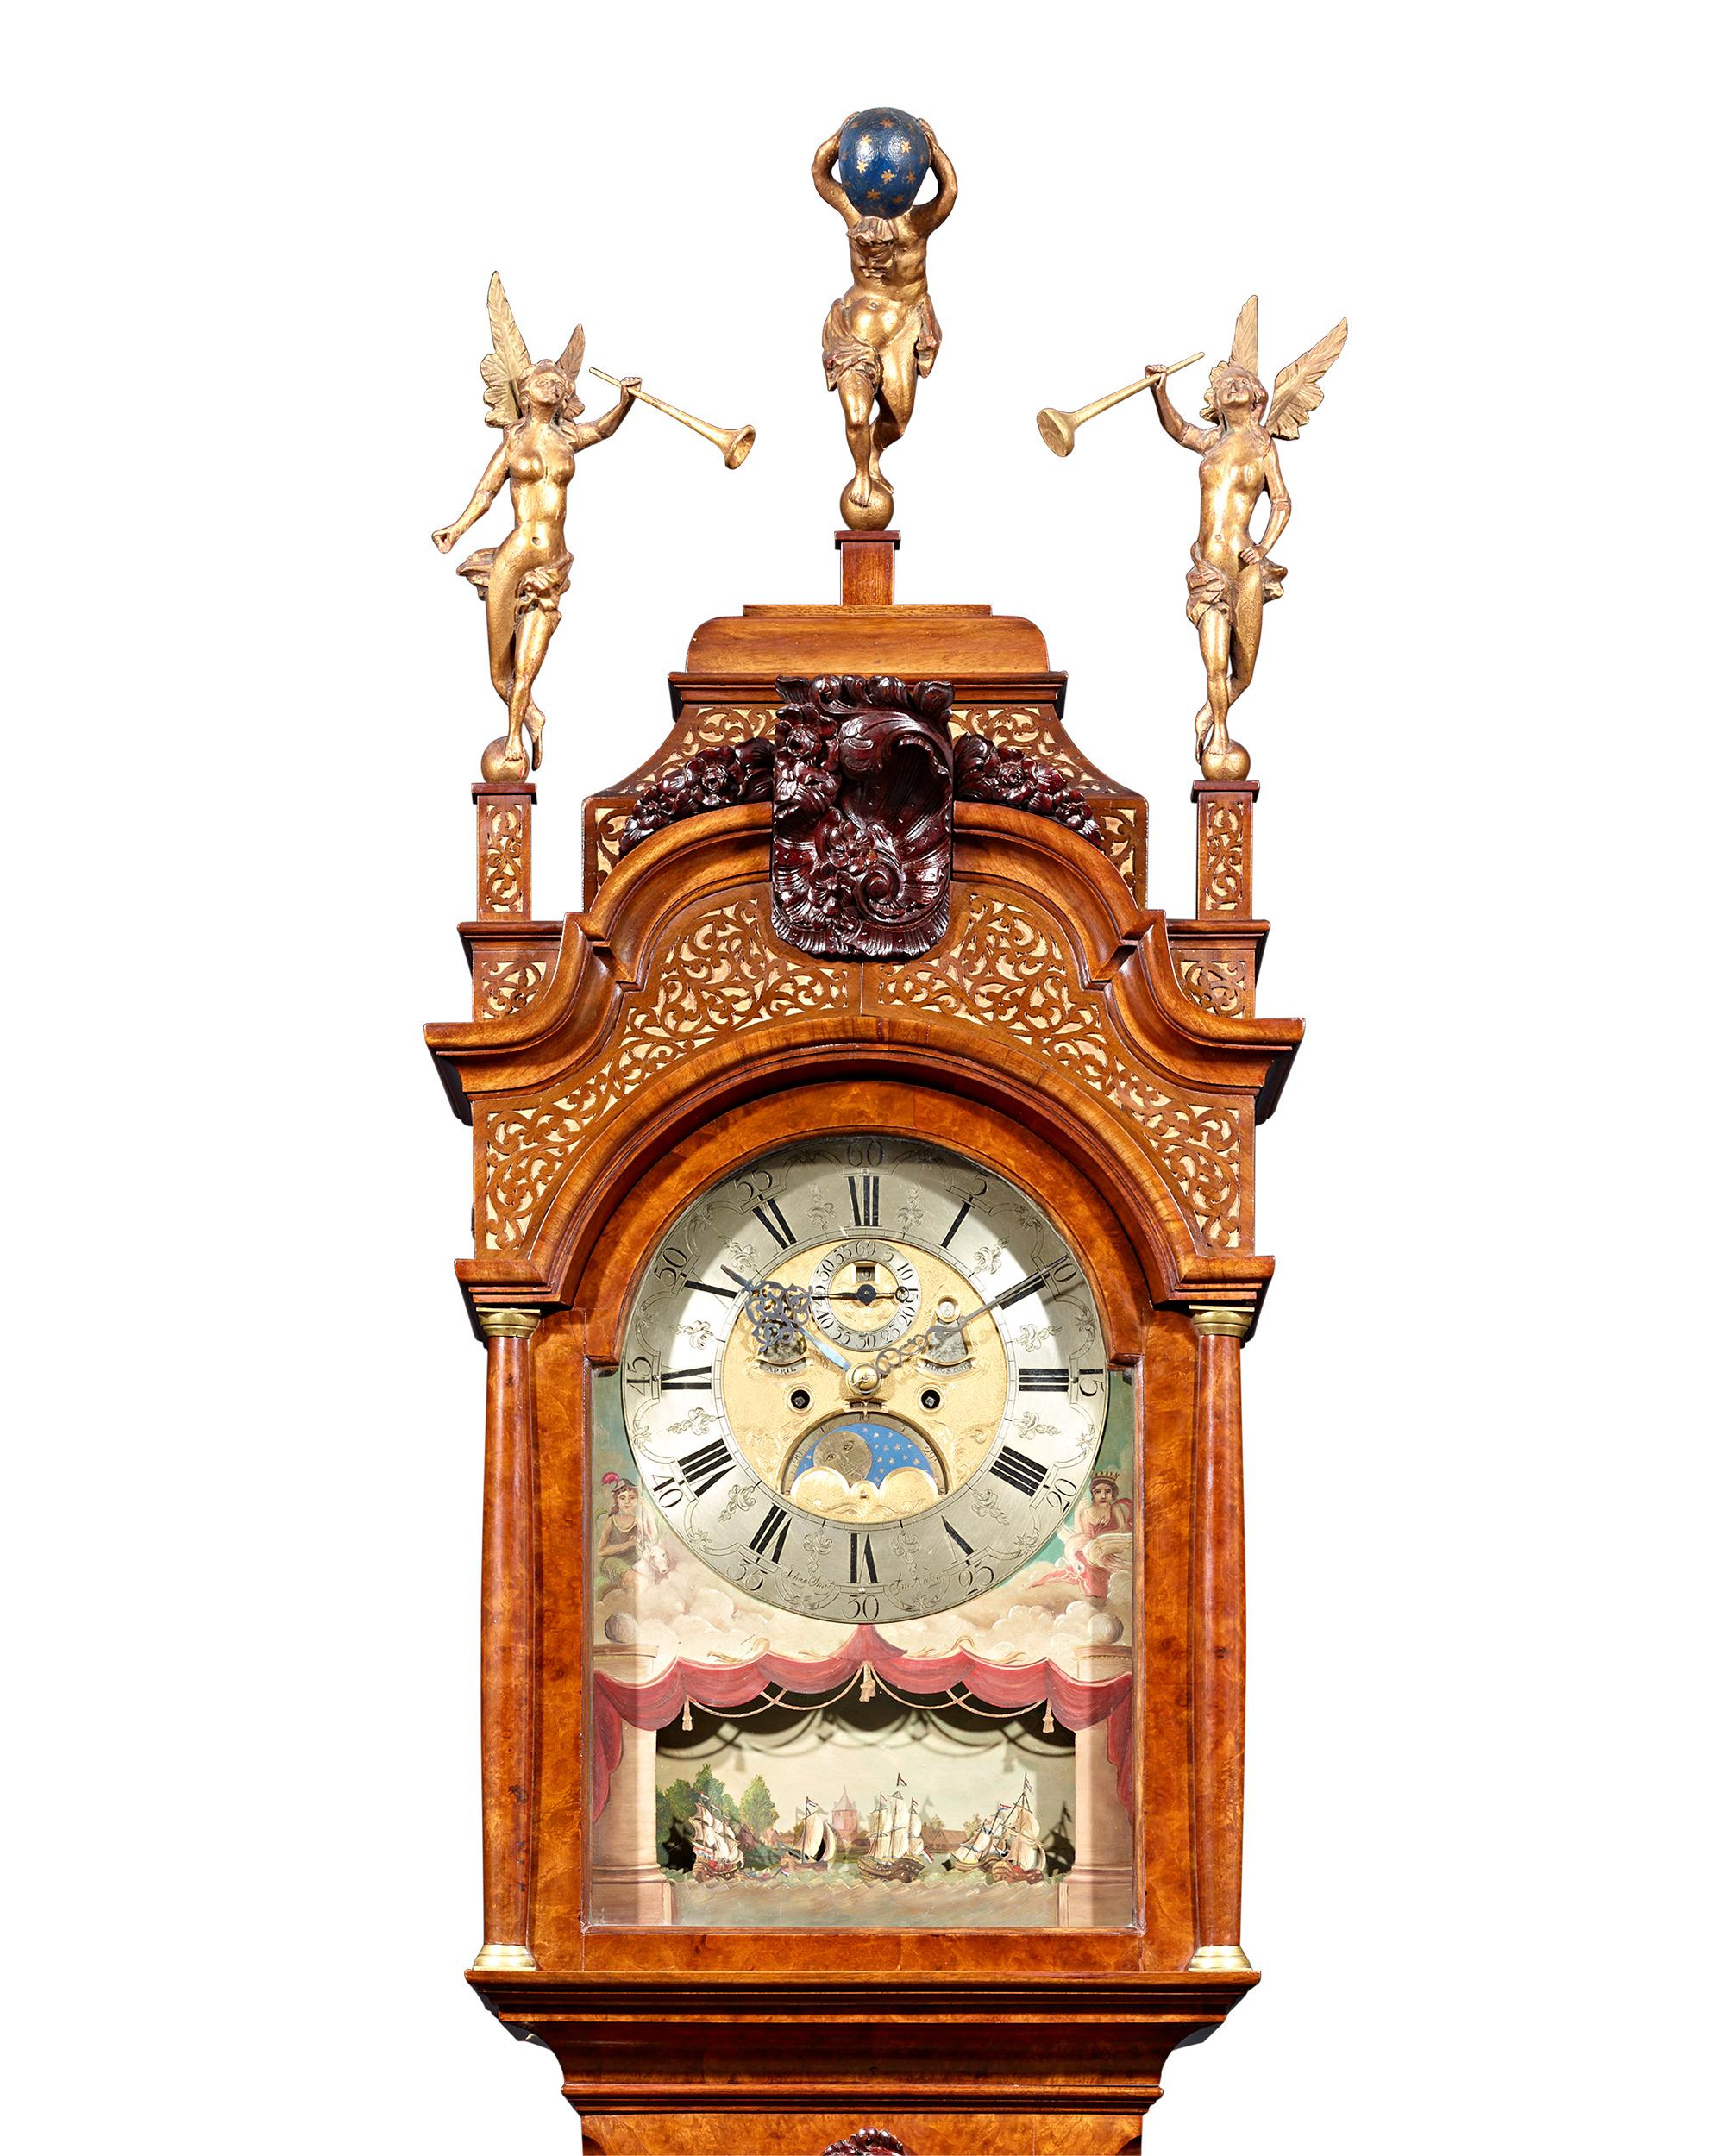 An incredible example of 18th century Dutch clock making, this marvelous tall case clock (also known as a longcase or grandfather clock) was crafted by Jonah Smith of Amsterdam. The late Baroque-style case is exemplary of those clocks commissioned